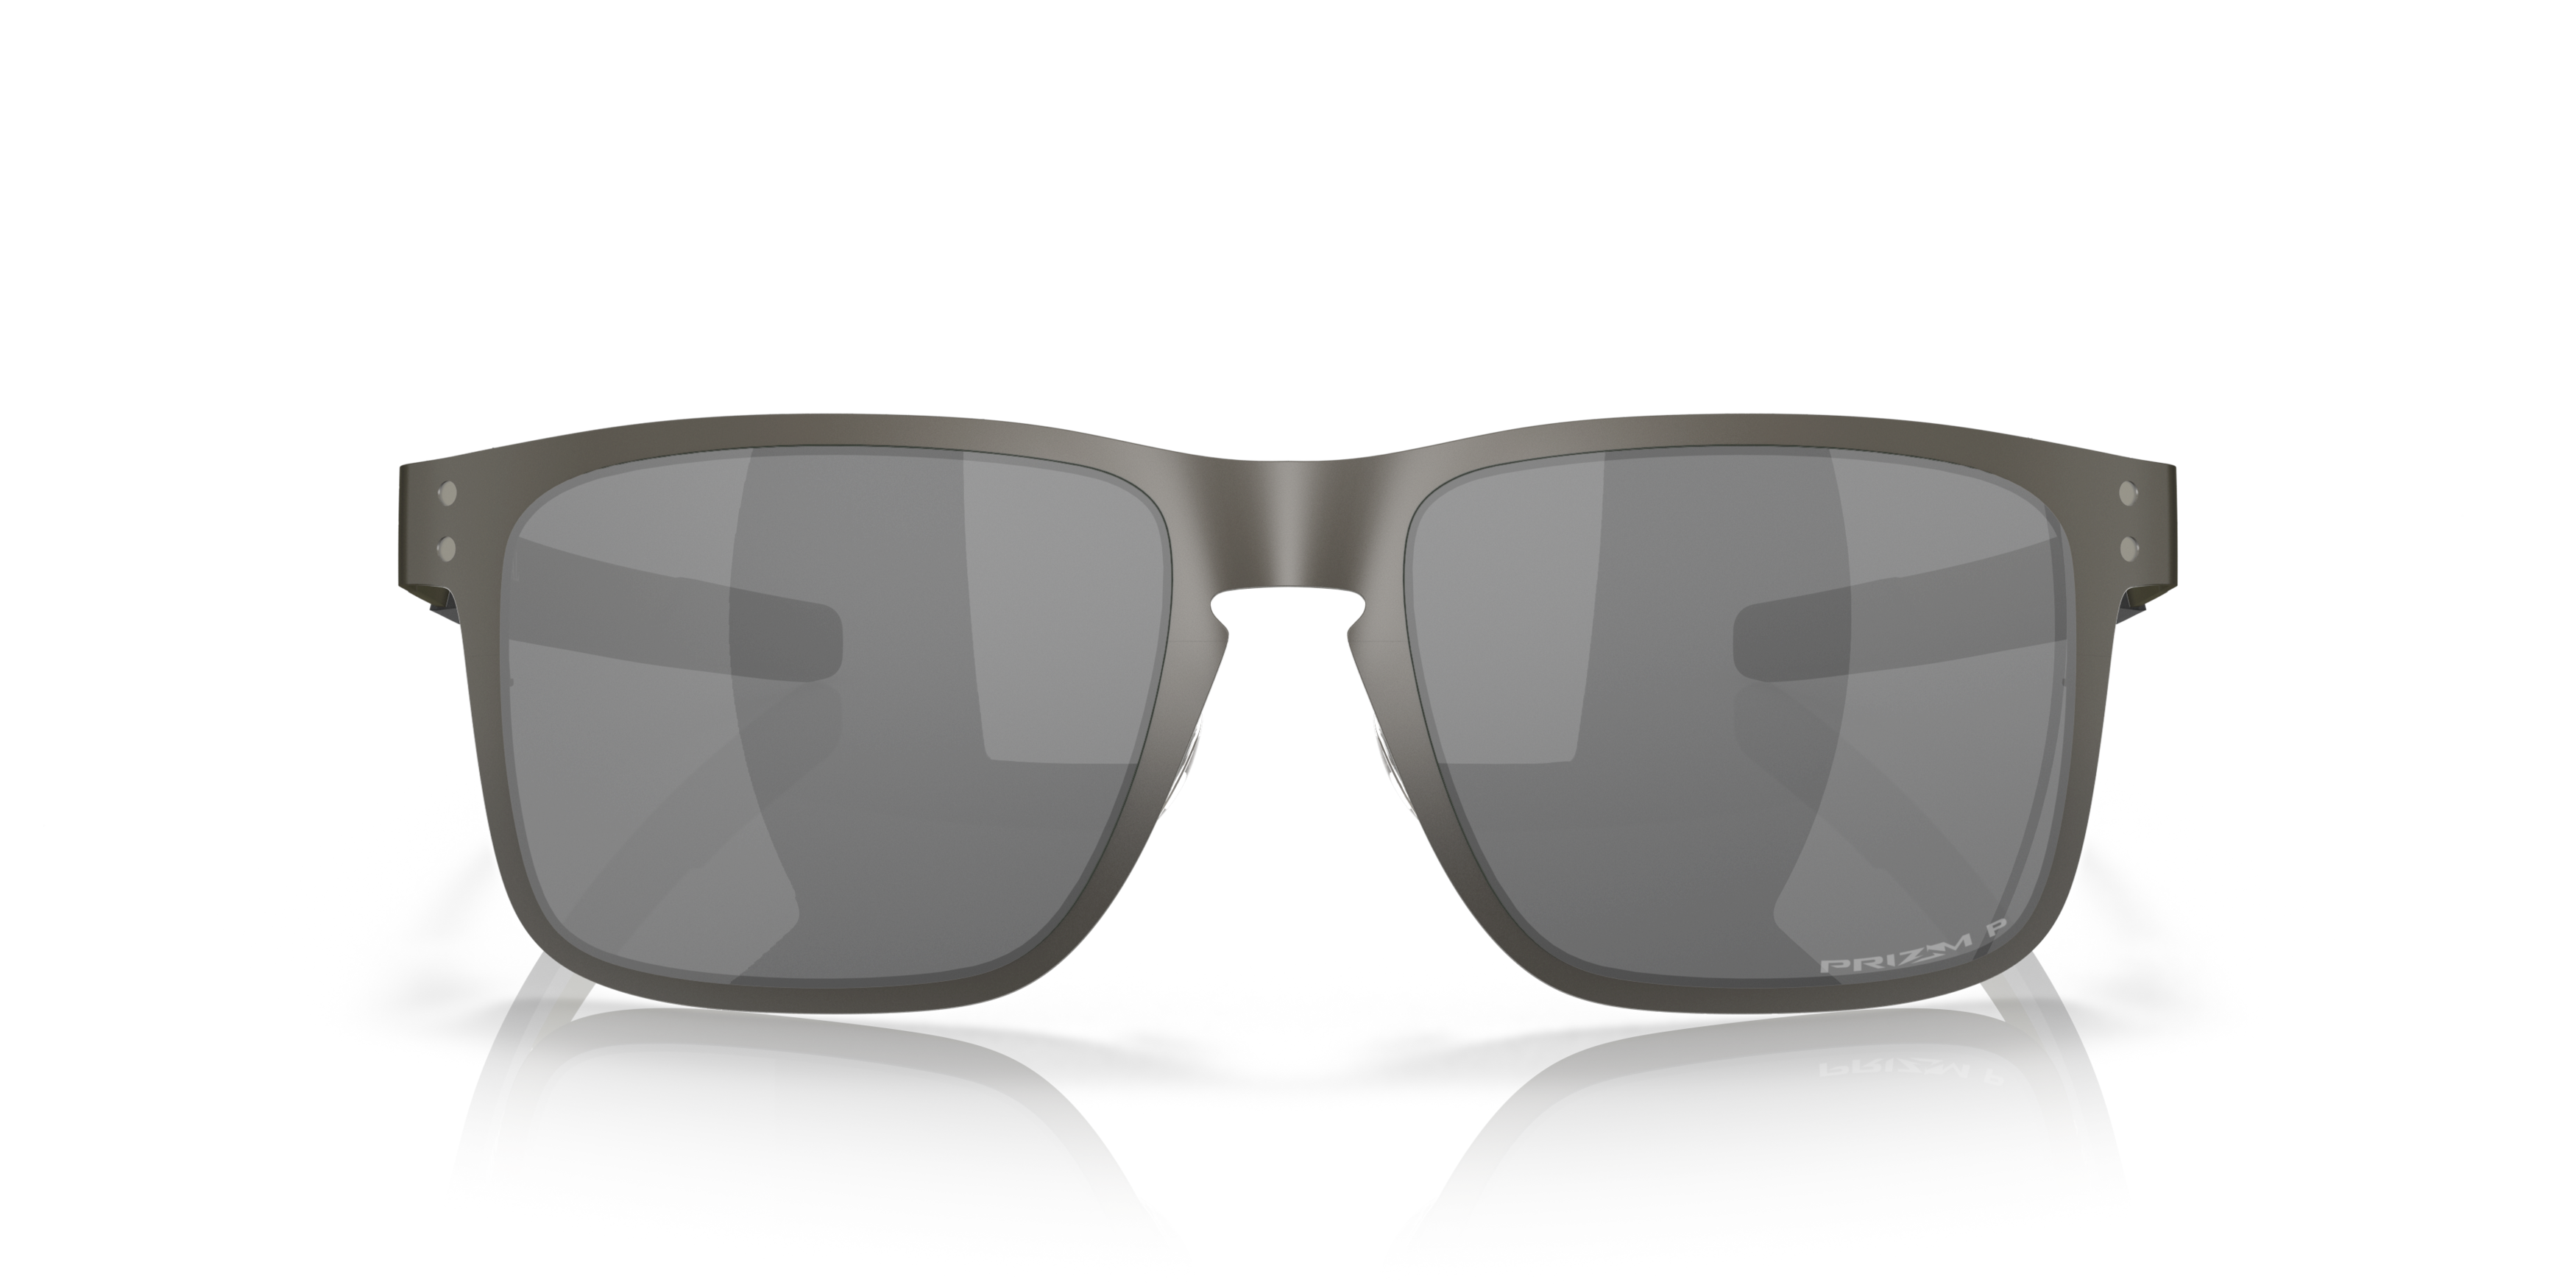 [products.image.front] Oakley OO4123 412306